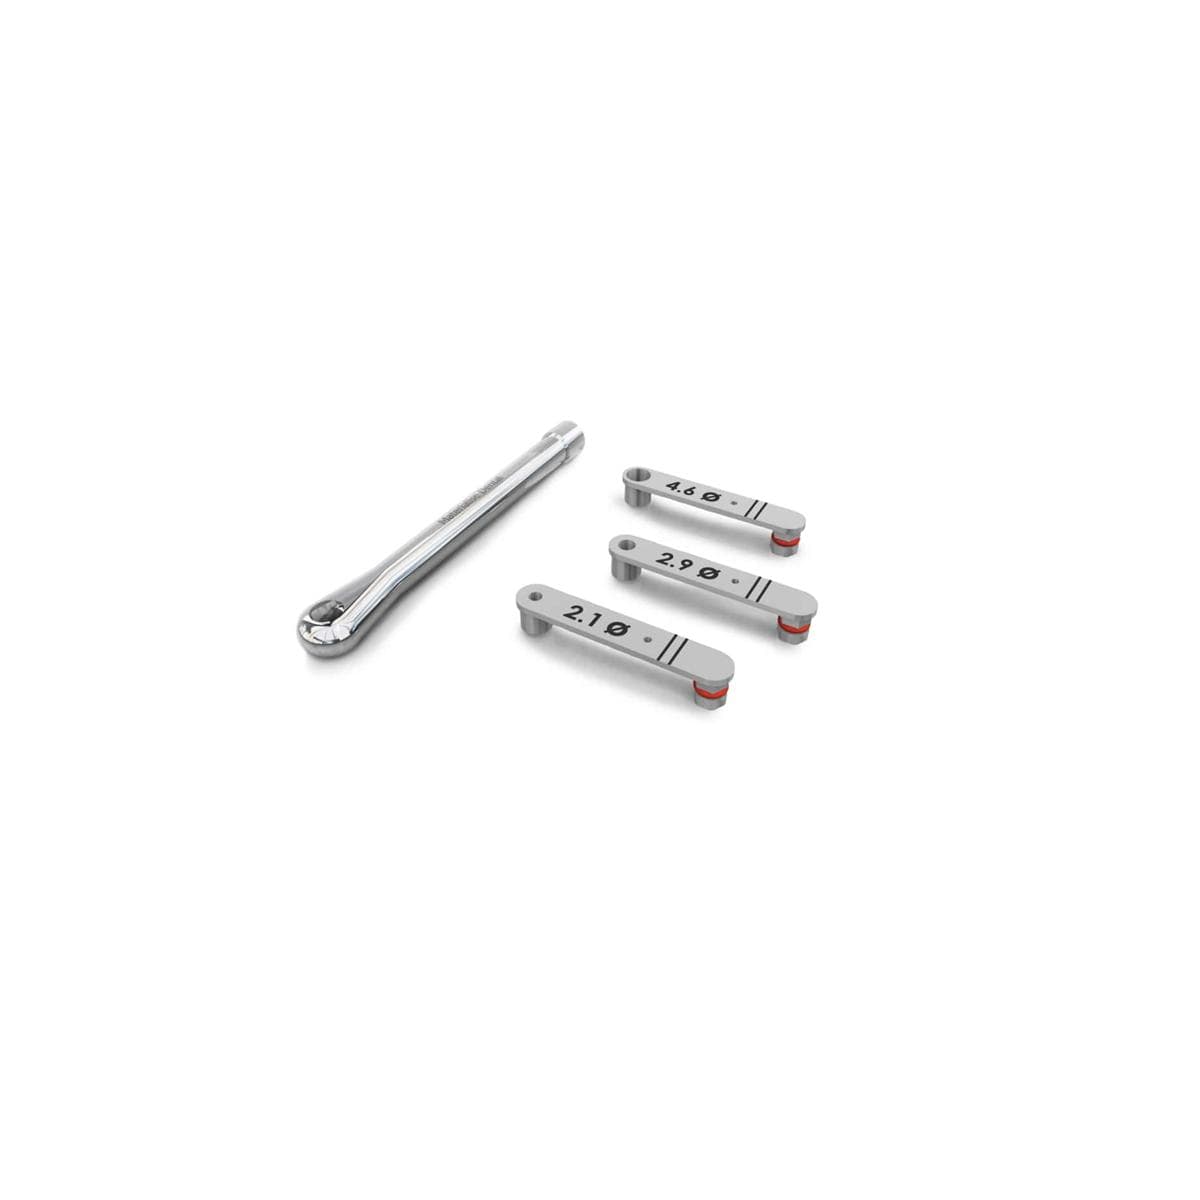 Cl de forage DENTSPLY SIRONA - Diamtre 5mm - Taille L